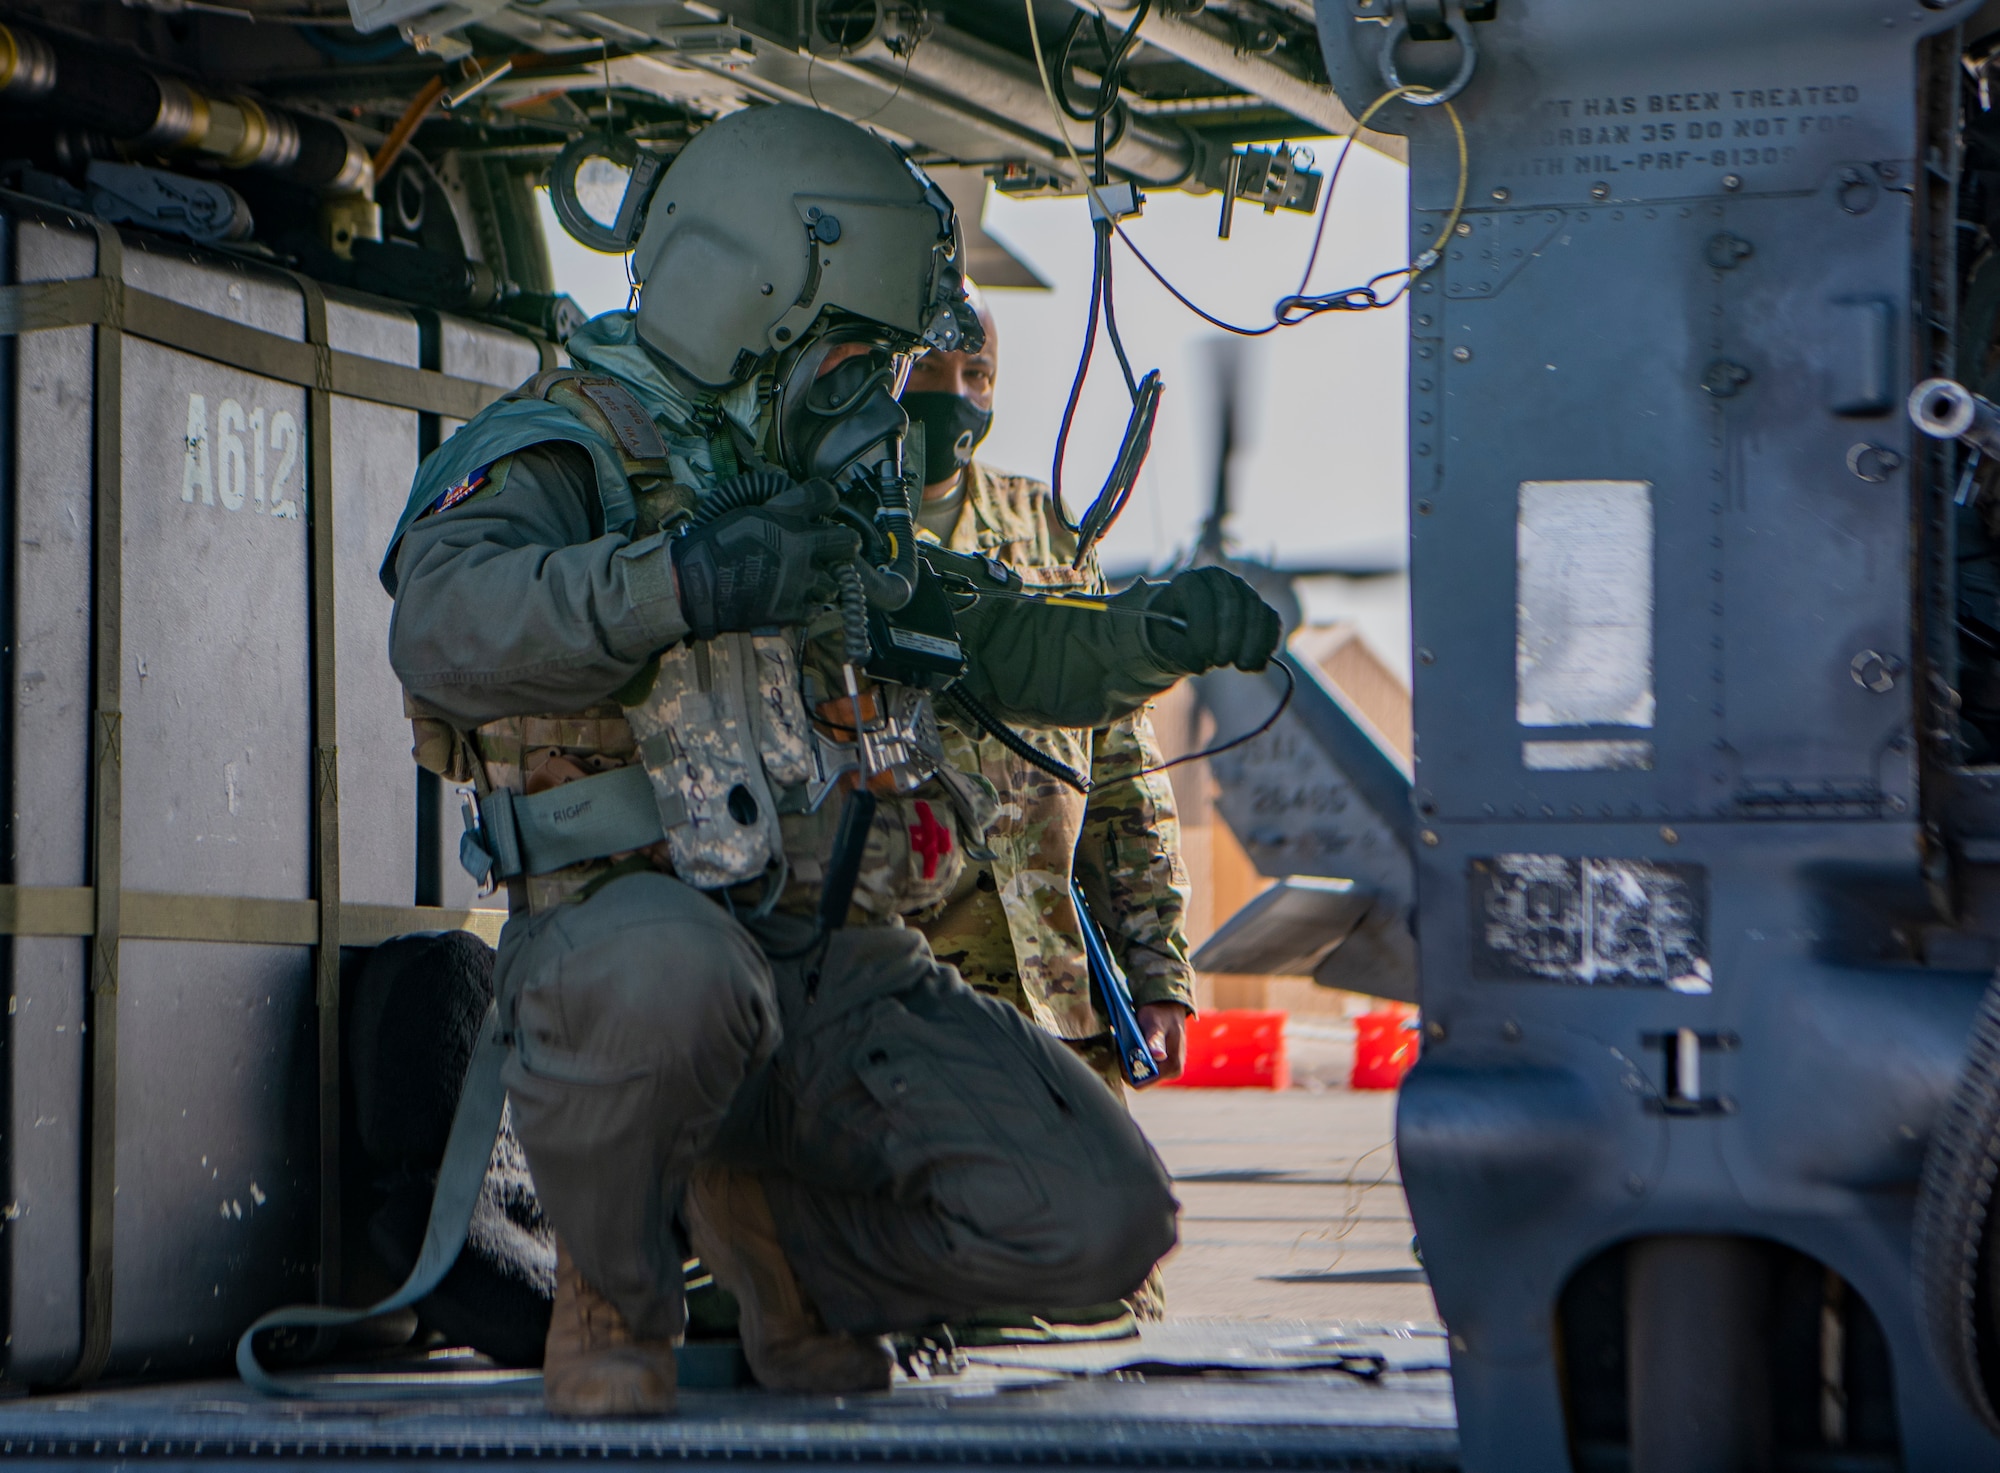 Airman performs pre-flight checks on a helicopter.